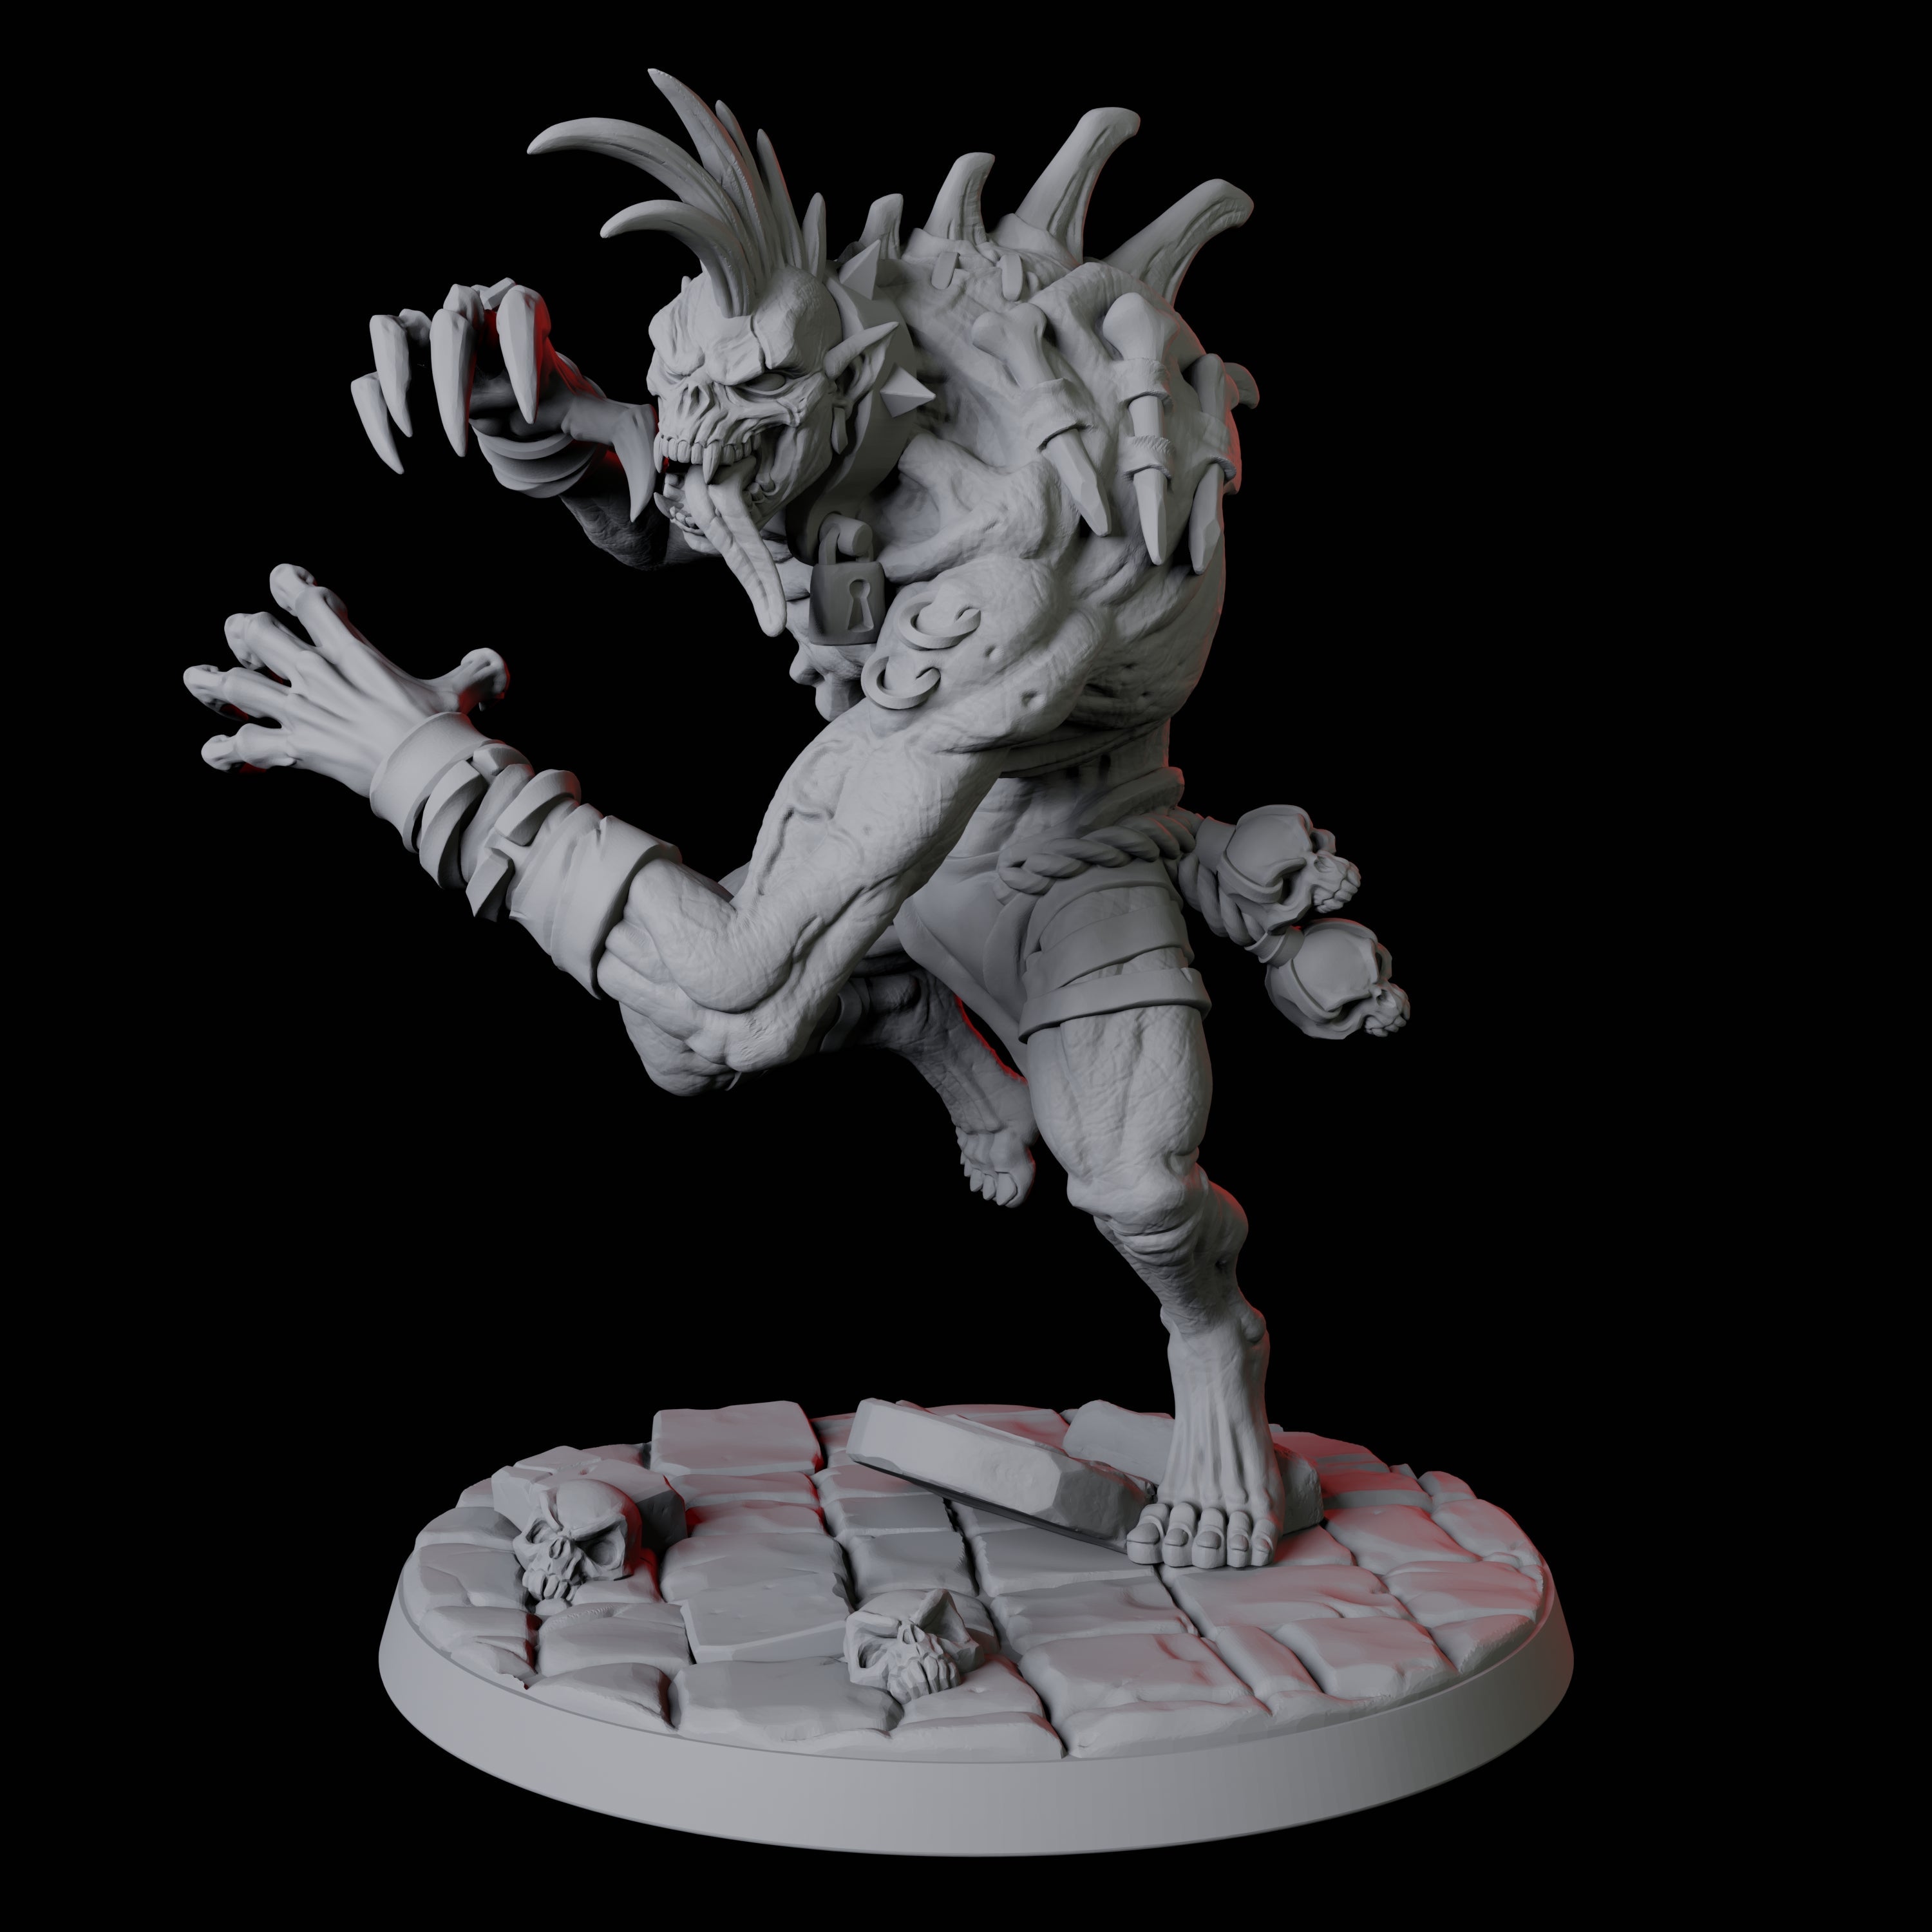 Roaming Ghast A Miniature for Dungeons and Dragons, Pathfinder or other TTRPGs